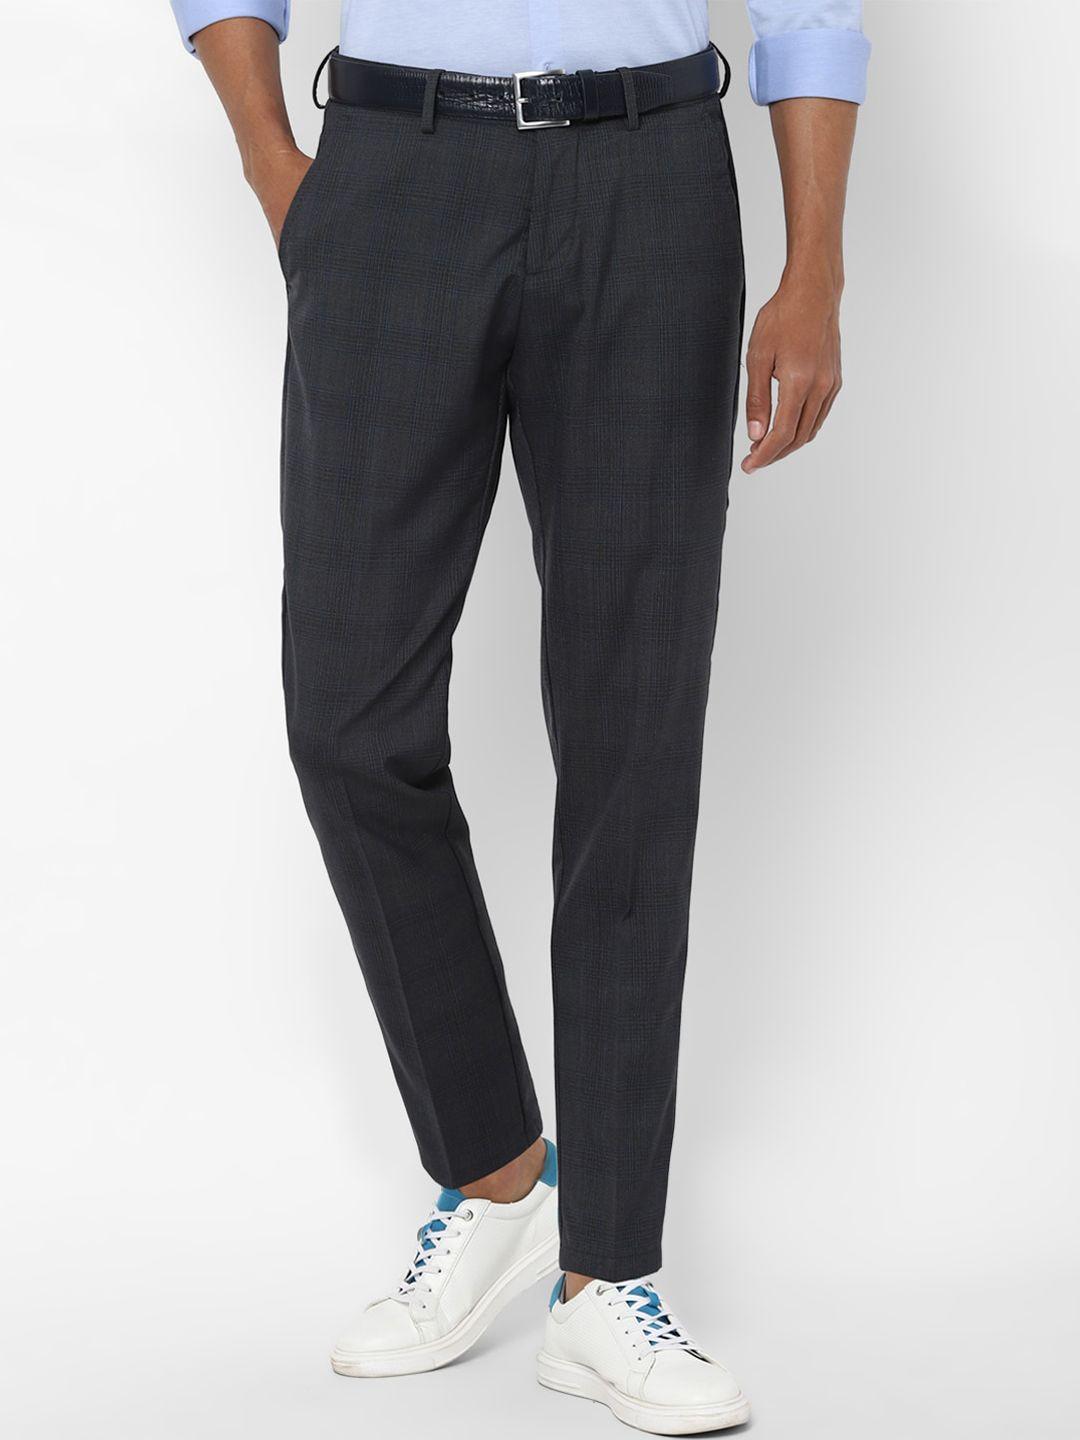 allen solly men black checked slim fit trousers